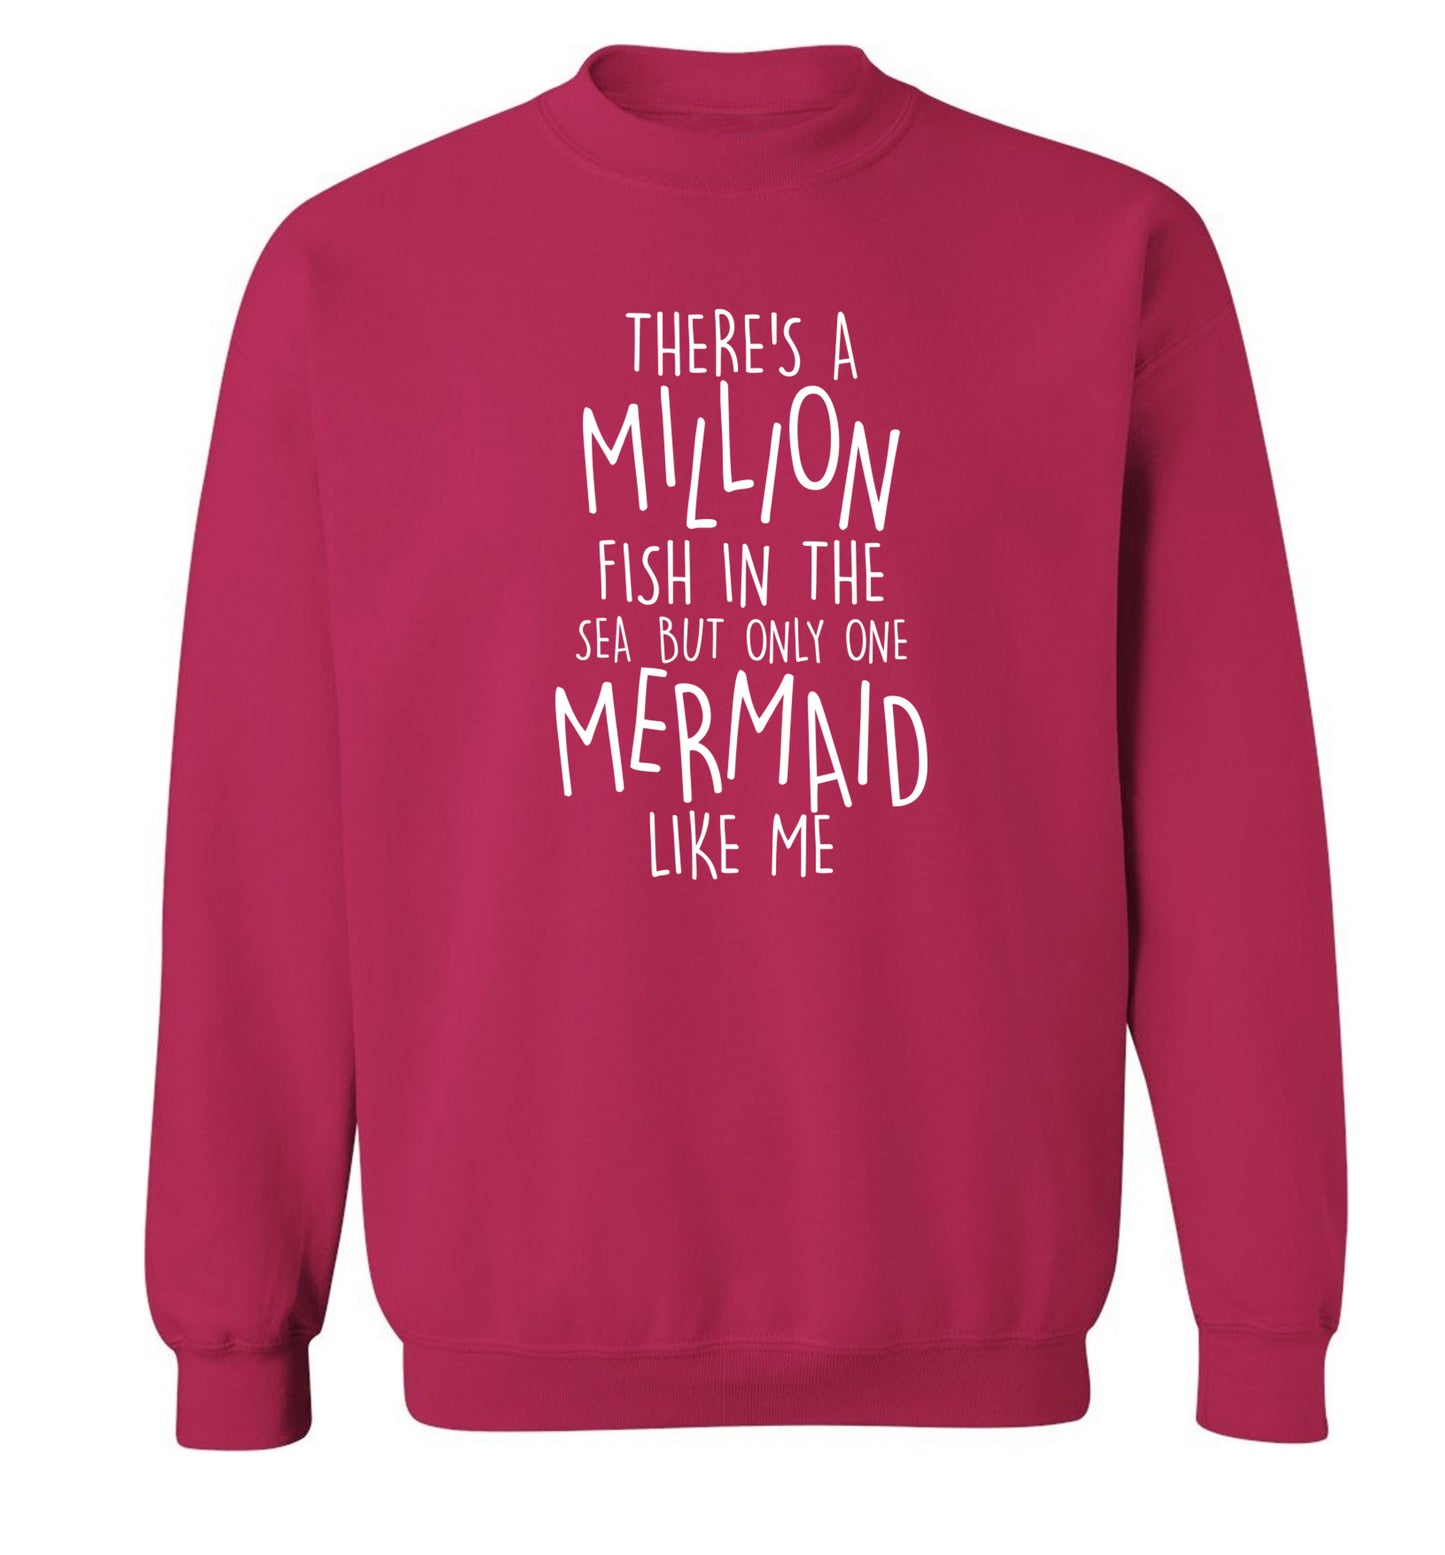 There's a million fish in the sea but only one mermaid like me Adult's unisex pink Sweater 2XL